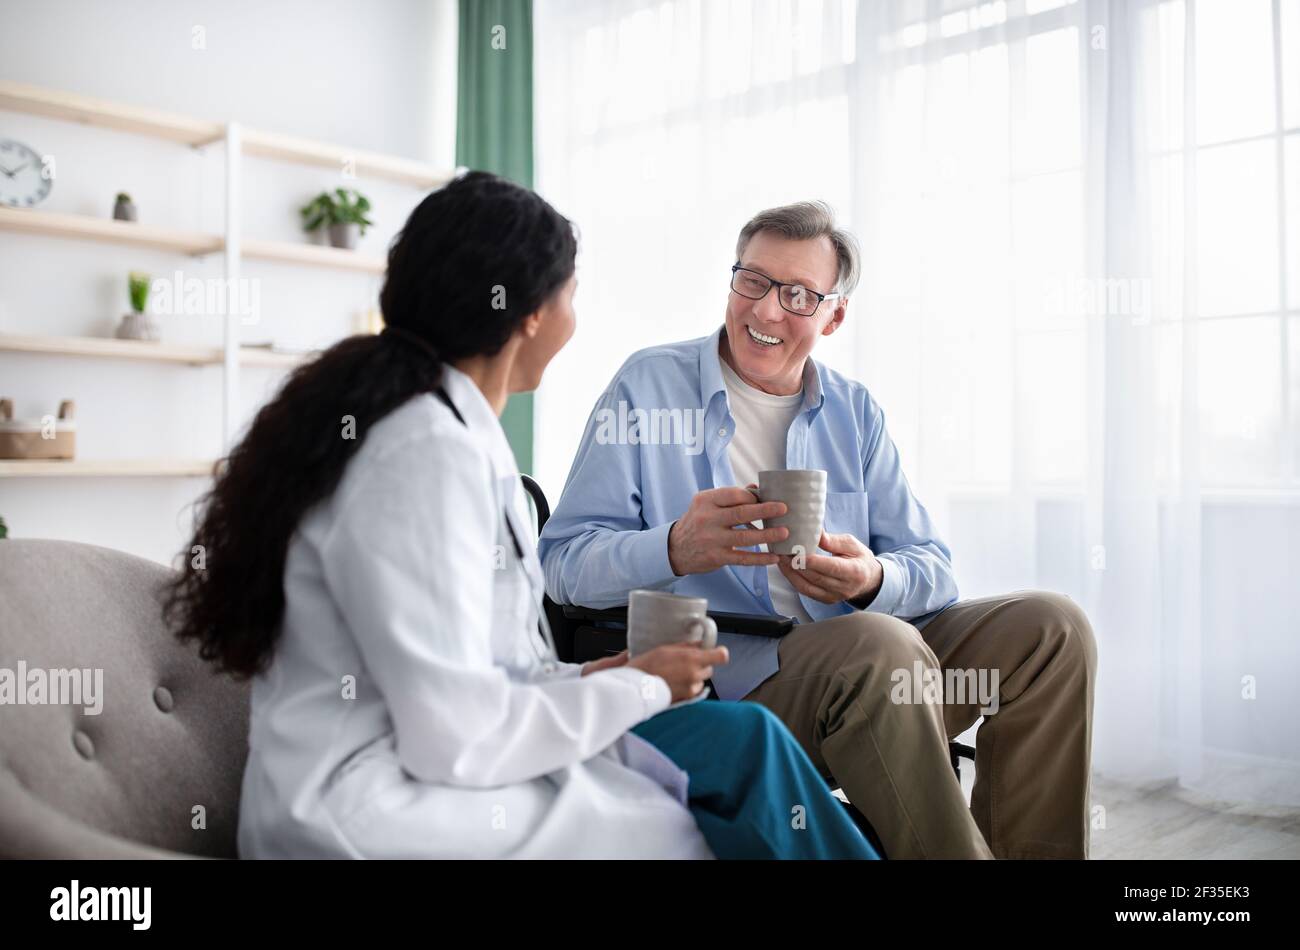 Happy disabled elderly patient and young doctor drinking tea together during medical visit at home Stock Photo